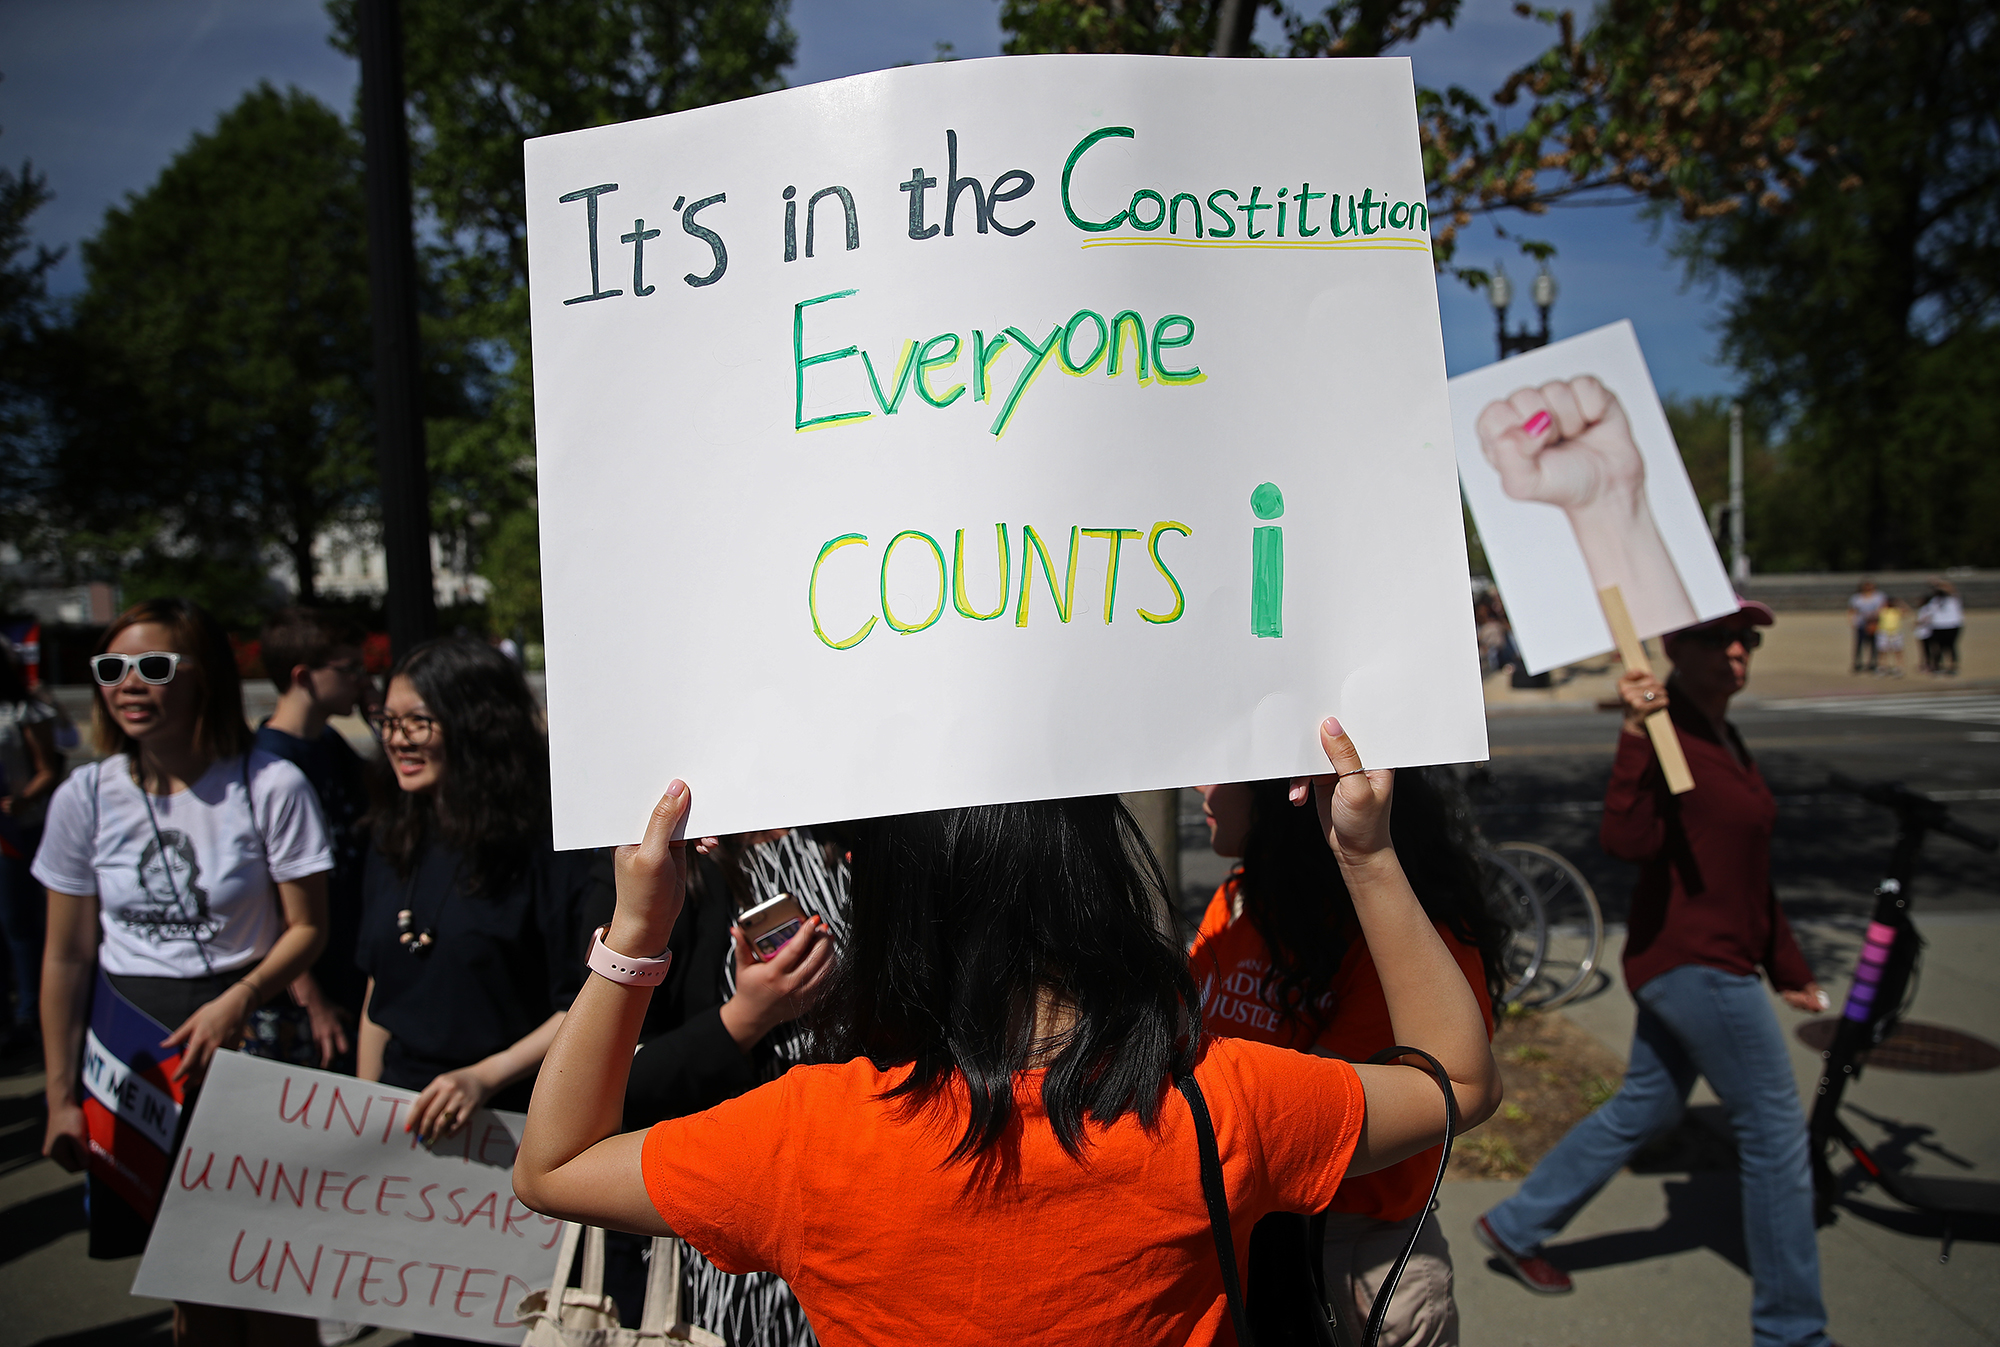 In this April 23, 2019 photo, protesters gather outside the U.S. Supreme Court as the court hears oral arguments in the Commerce vs. New York case in Washington, DC. The case highlights a question about U.S. citizenship included by the Trump administration in the proposed 2020 census.